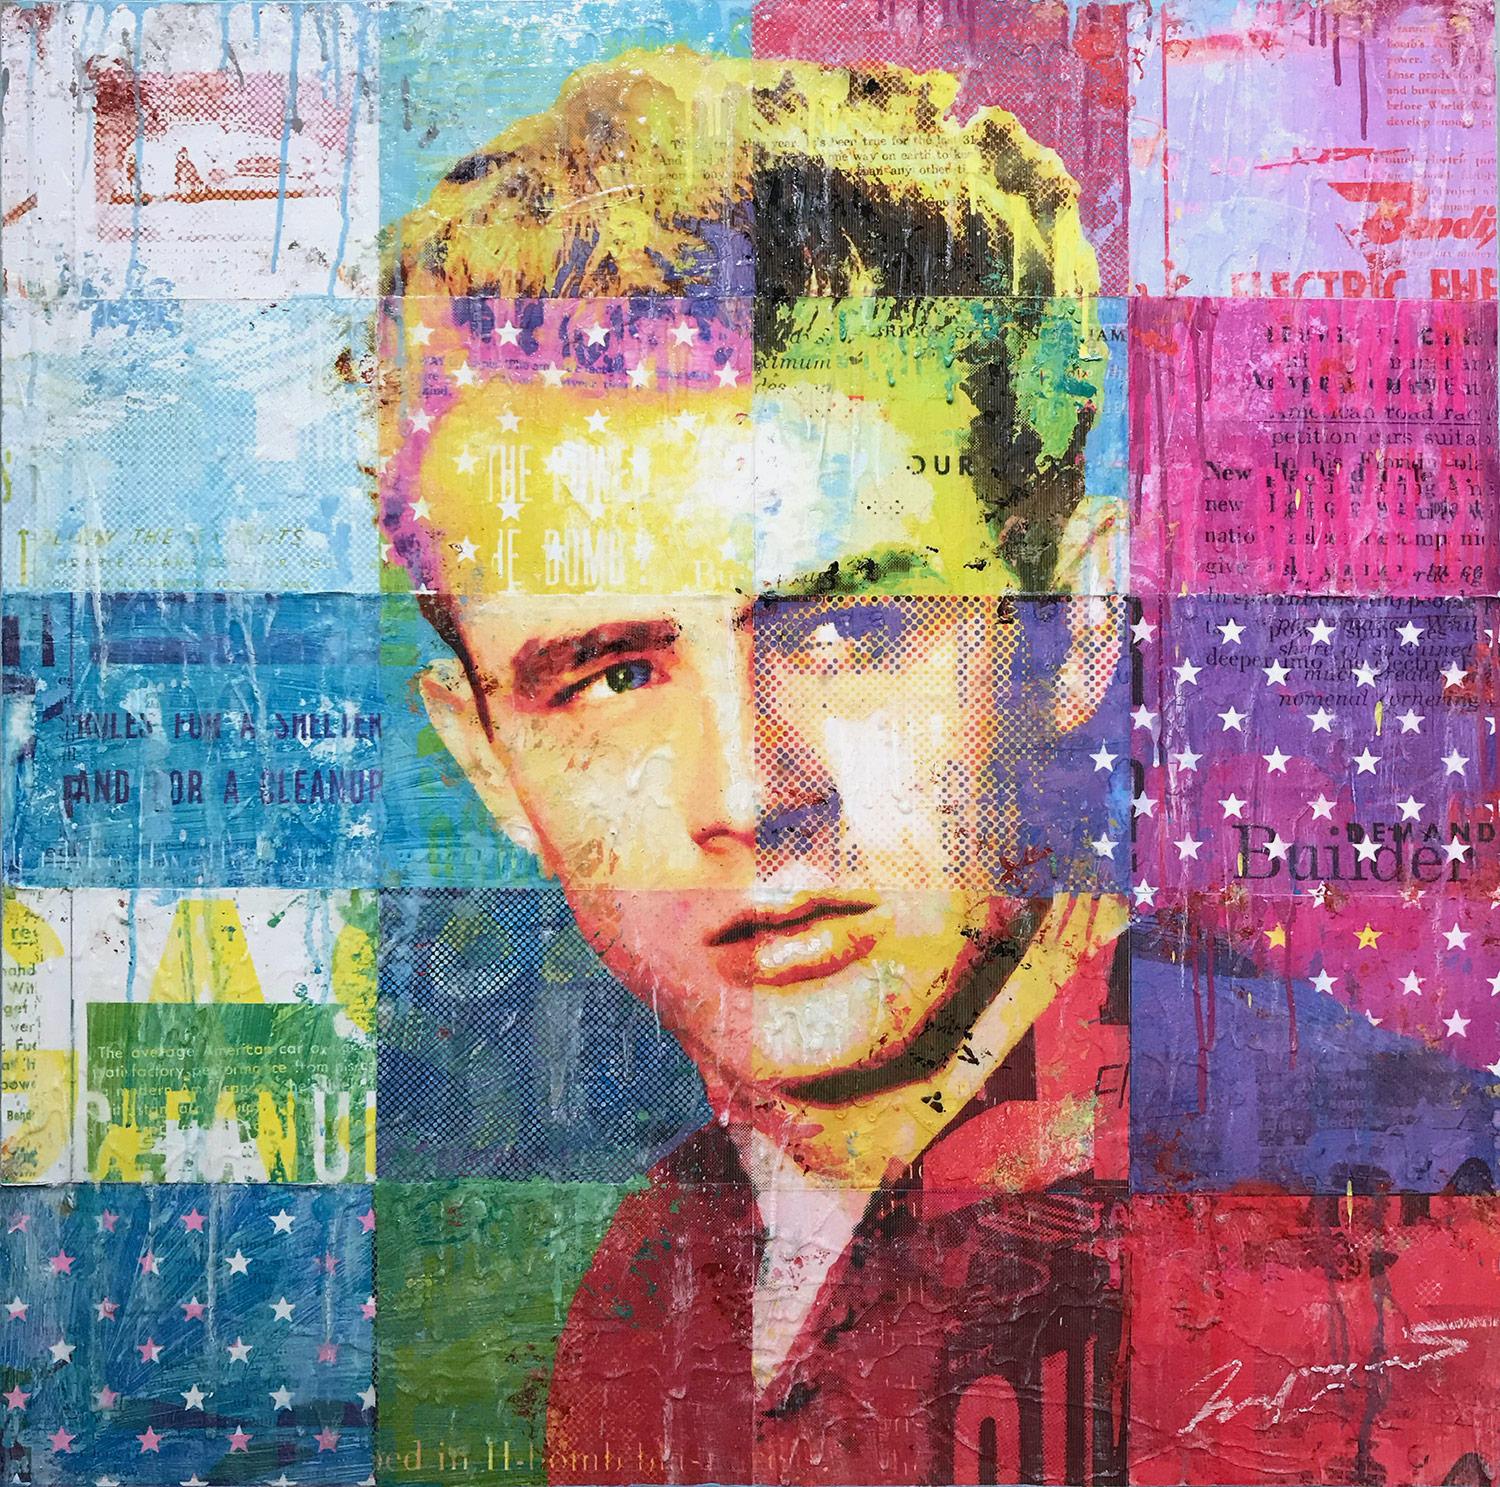 Jon Davenport Portrait Painting - "American Rebel" Mixed Media James Dean Collage Composition on Panel Board